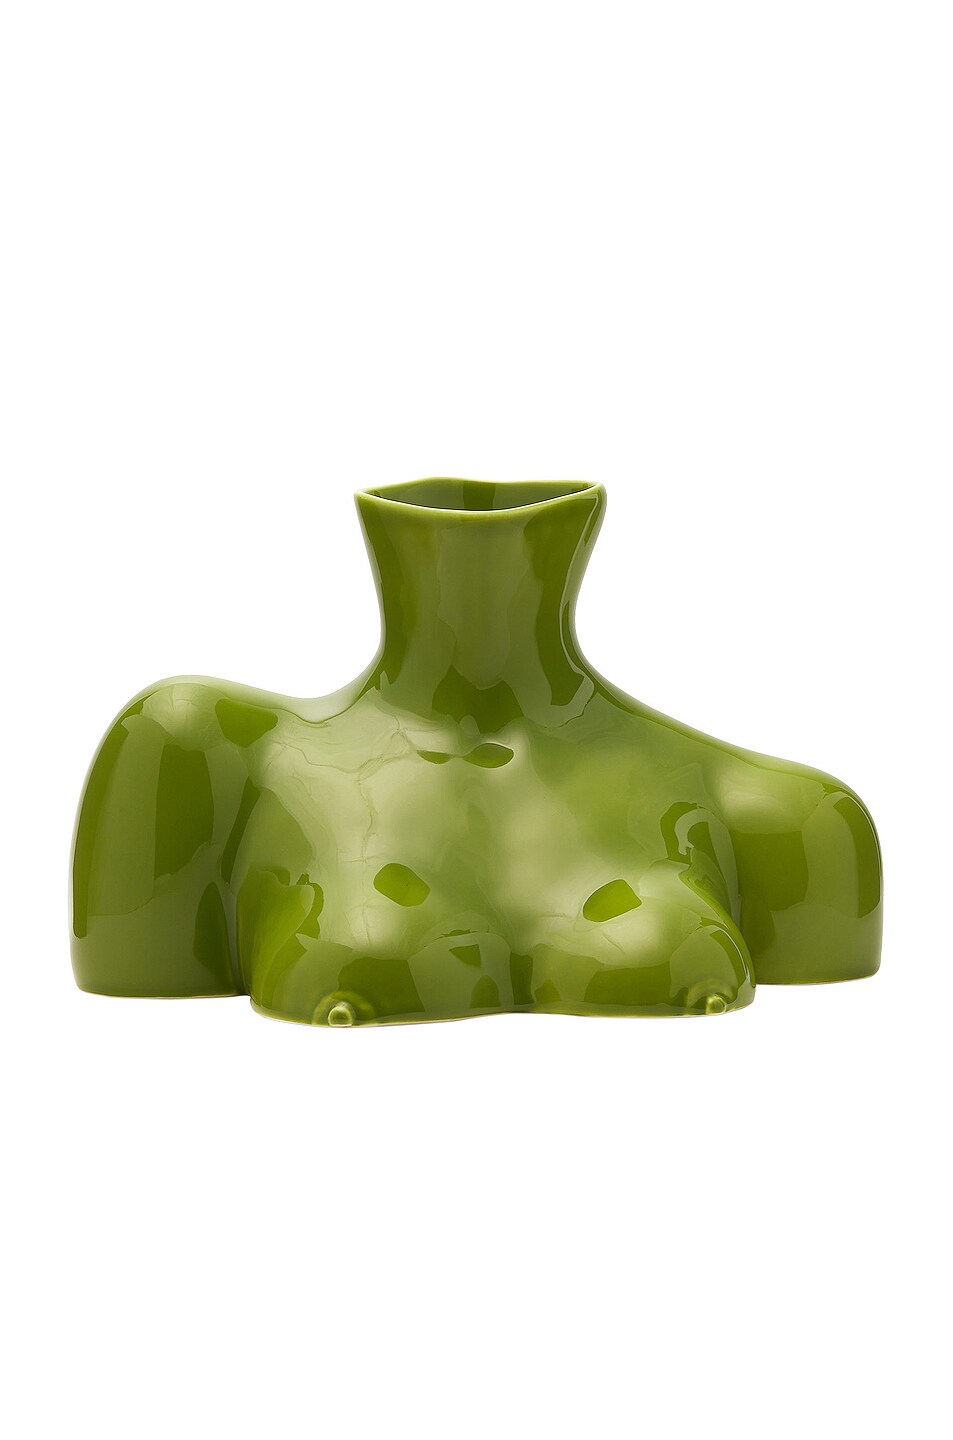 Image 1 of Anissa Kermiche Breast Friend Vase in Olive Green Shiny